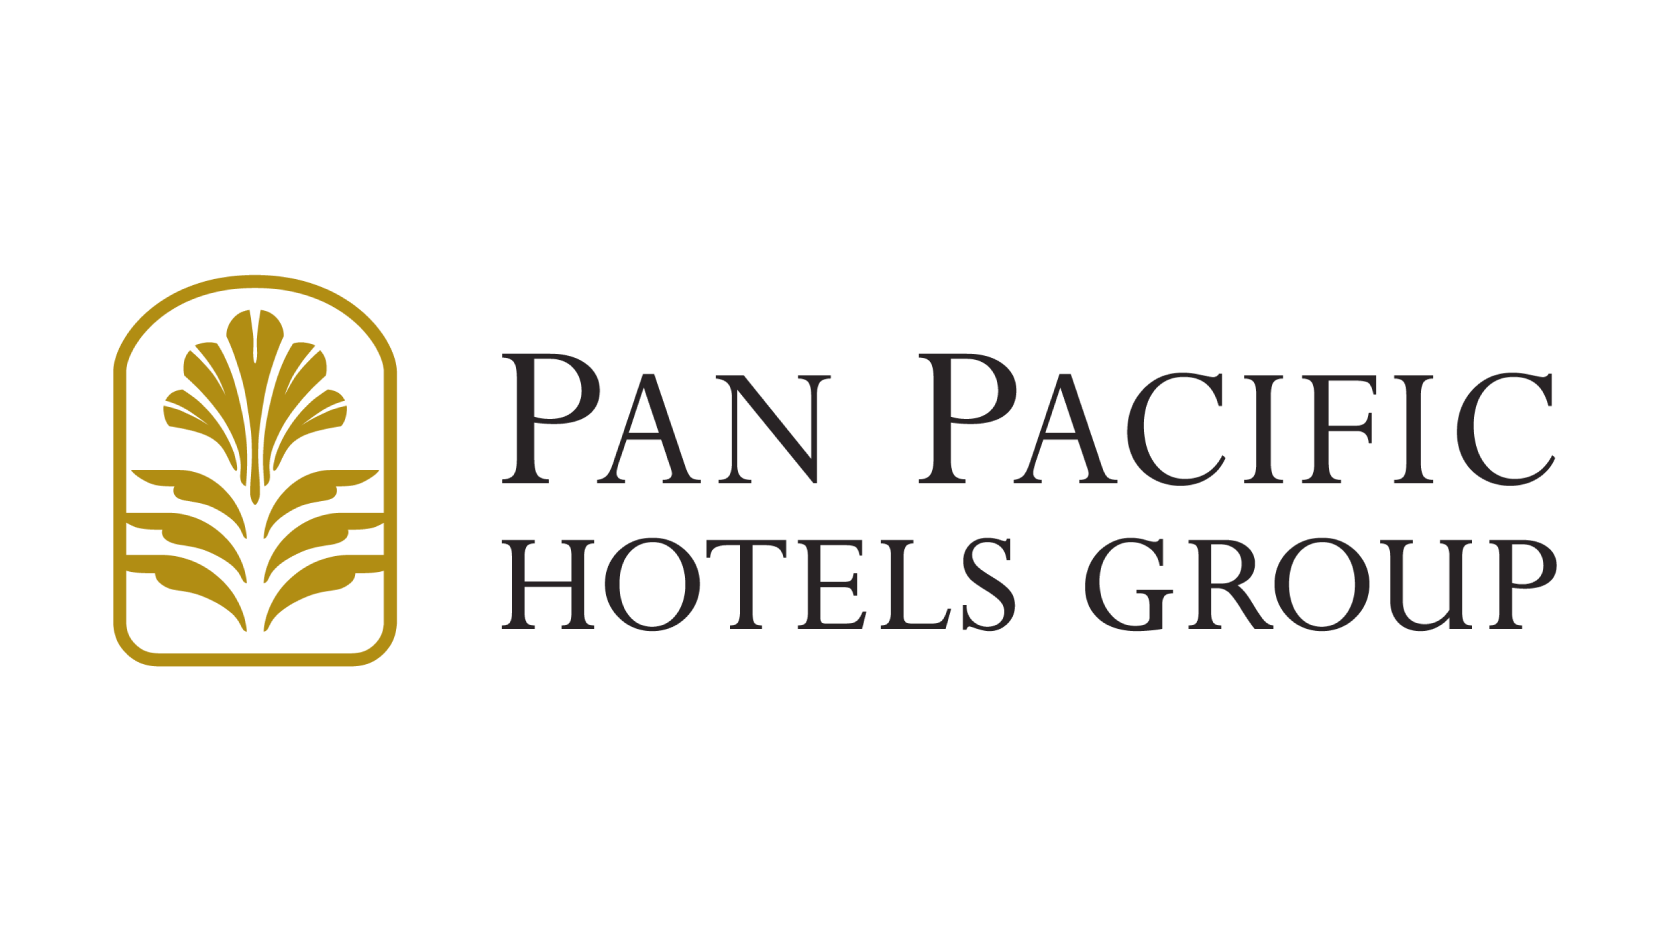 Pacific Hotel logos. Pacific Group logo. Pan Pacific Toronto. Louvre Hotels Group лого.